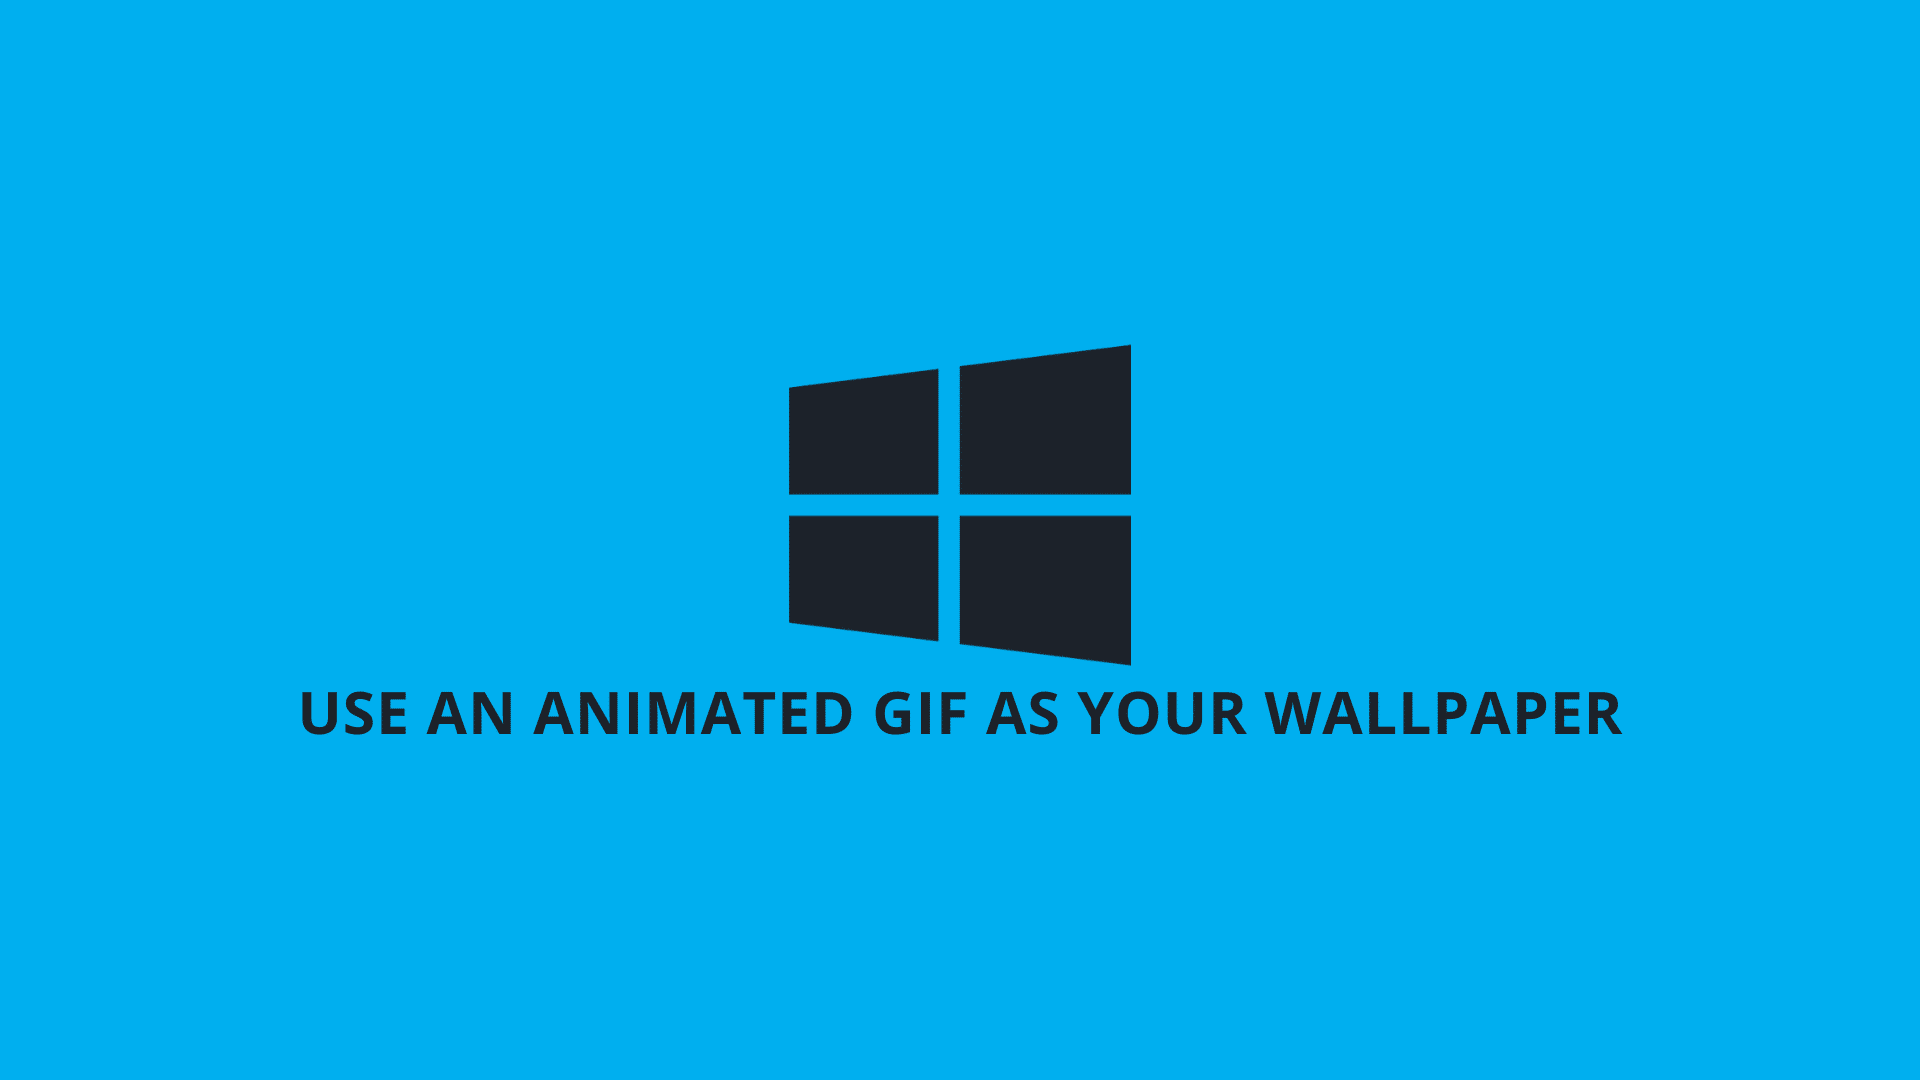 How to Use an Animated GIF as Your Wallpaper in Windows 10 Computers